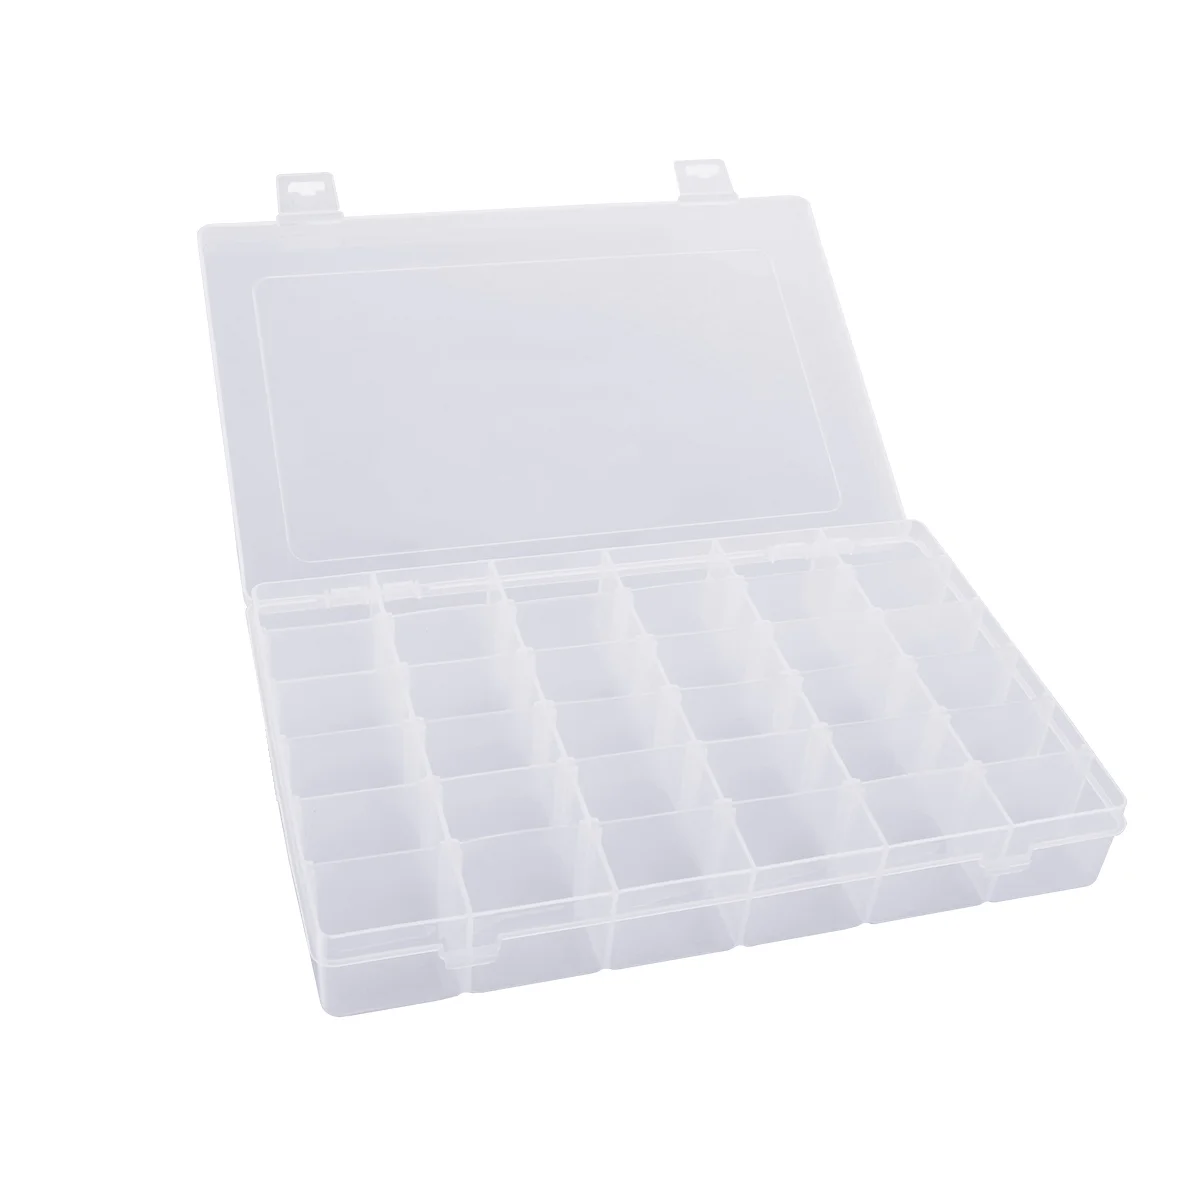 

Box Organizer Storage Jewelry Oganize Bead Container Clear Plastic Wely Sorter I Travel Containers Tackle Stoage Divide Earring